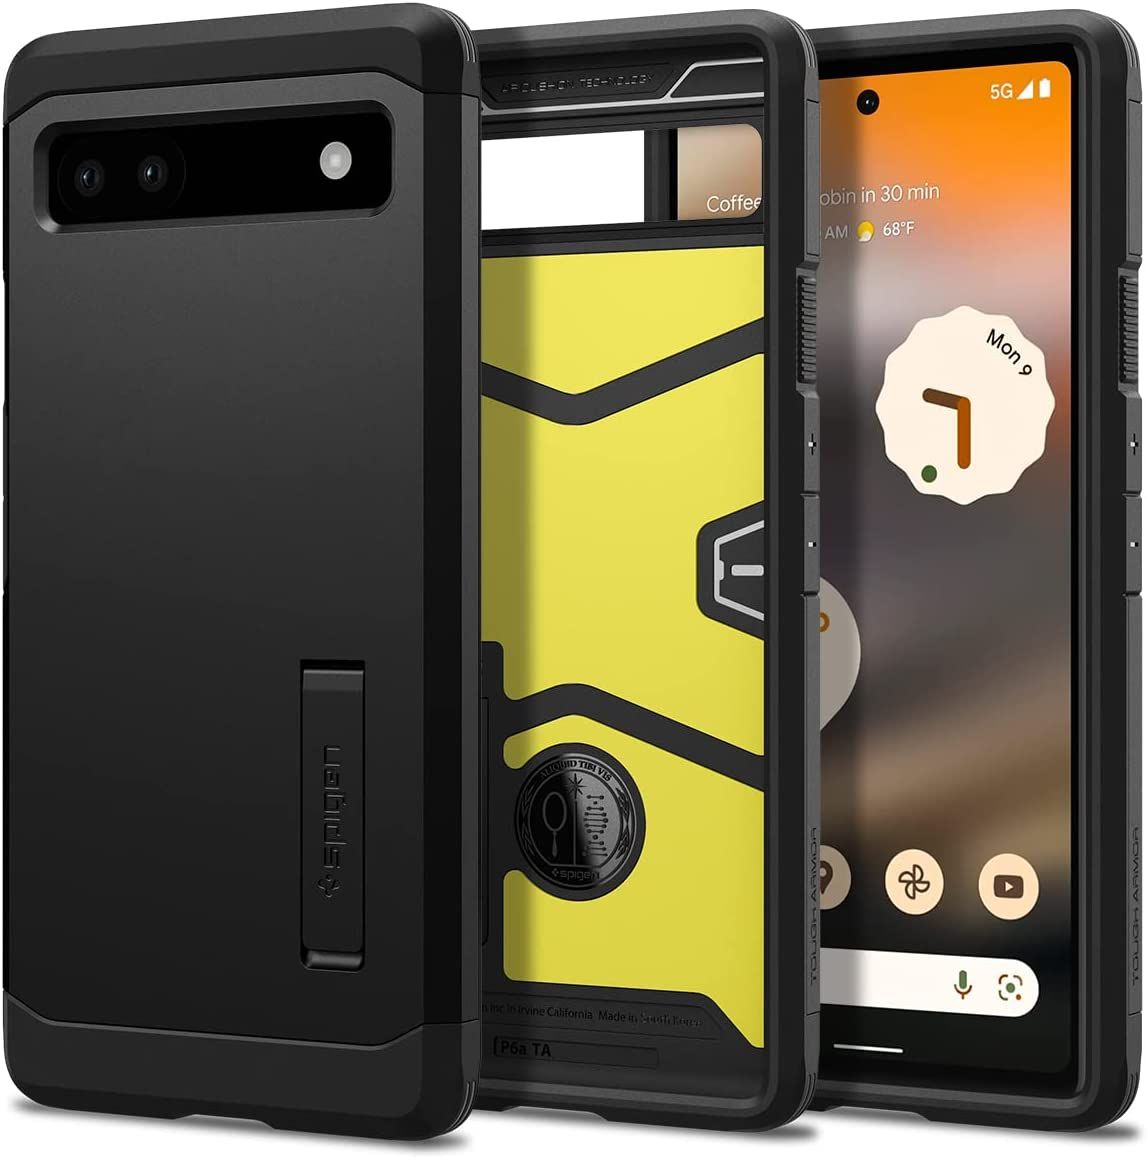 The Spigen Tough Armor is one of the best protective cases for the Pixel 6a. The case has a dual-layer construction for added drop and shock protection and a built-in kickstand for hands-free media consumption.